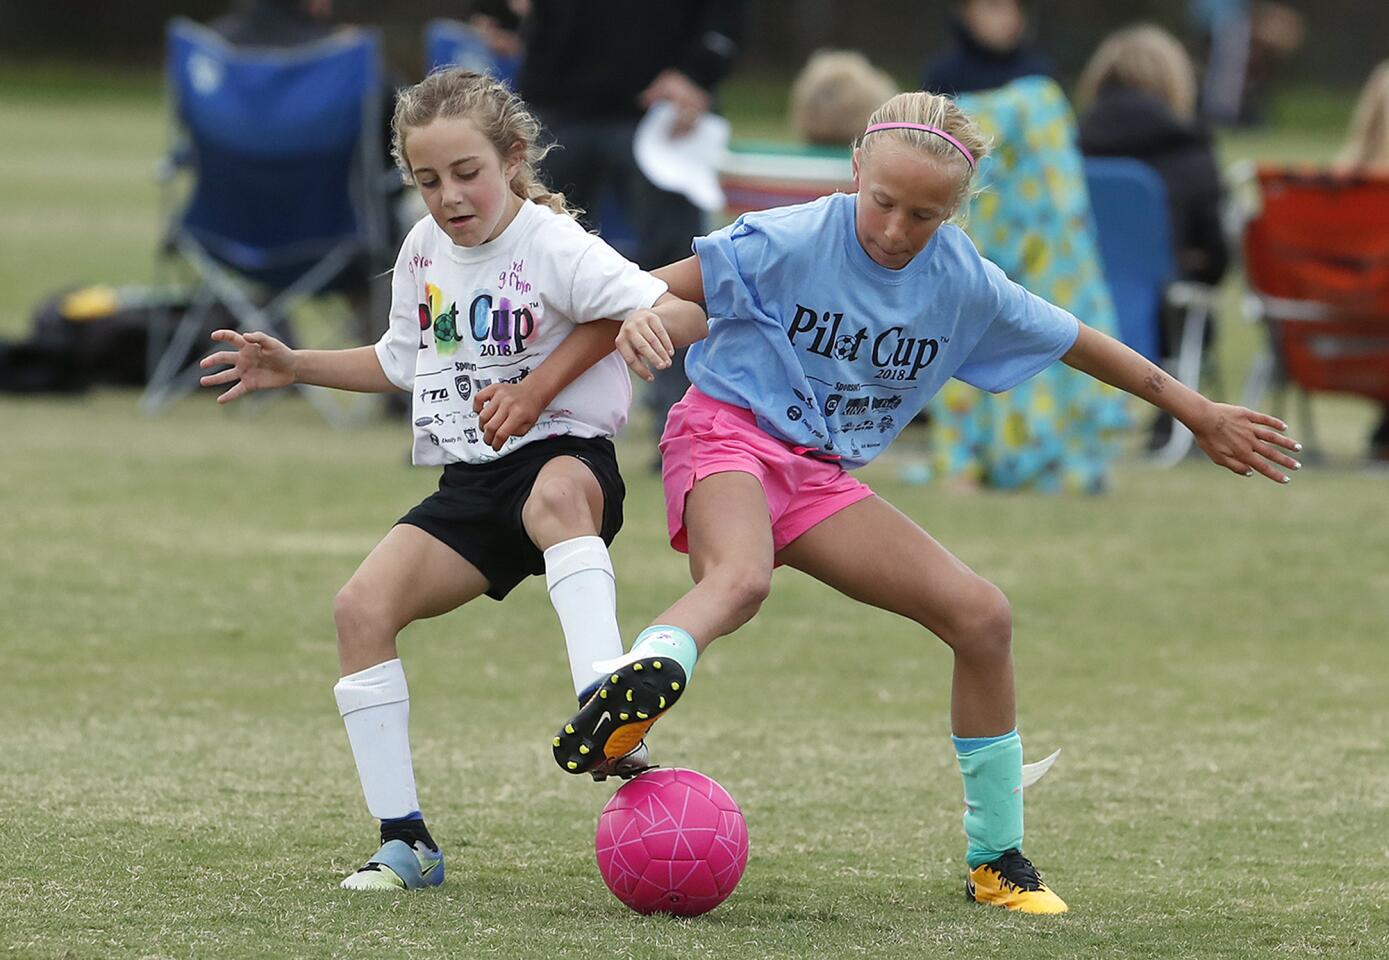 Photo Gallery: Andersen B vs. Eastbluff B at the Daily Pilot Cup